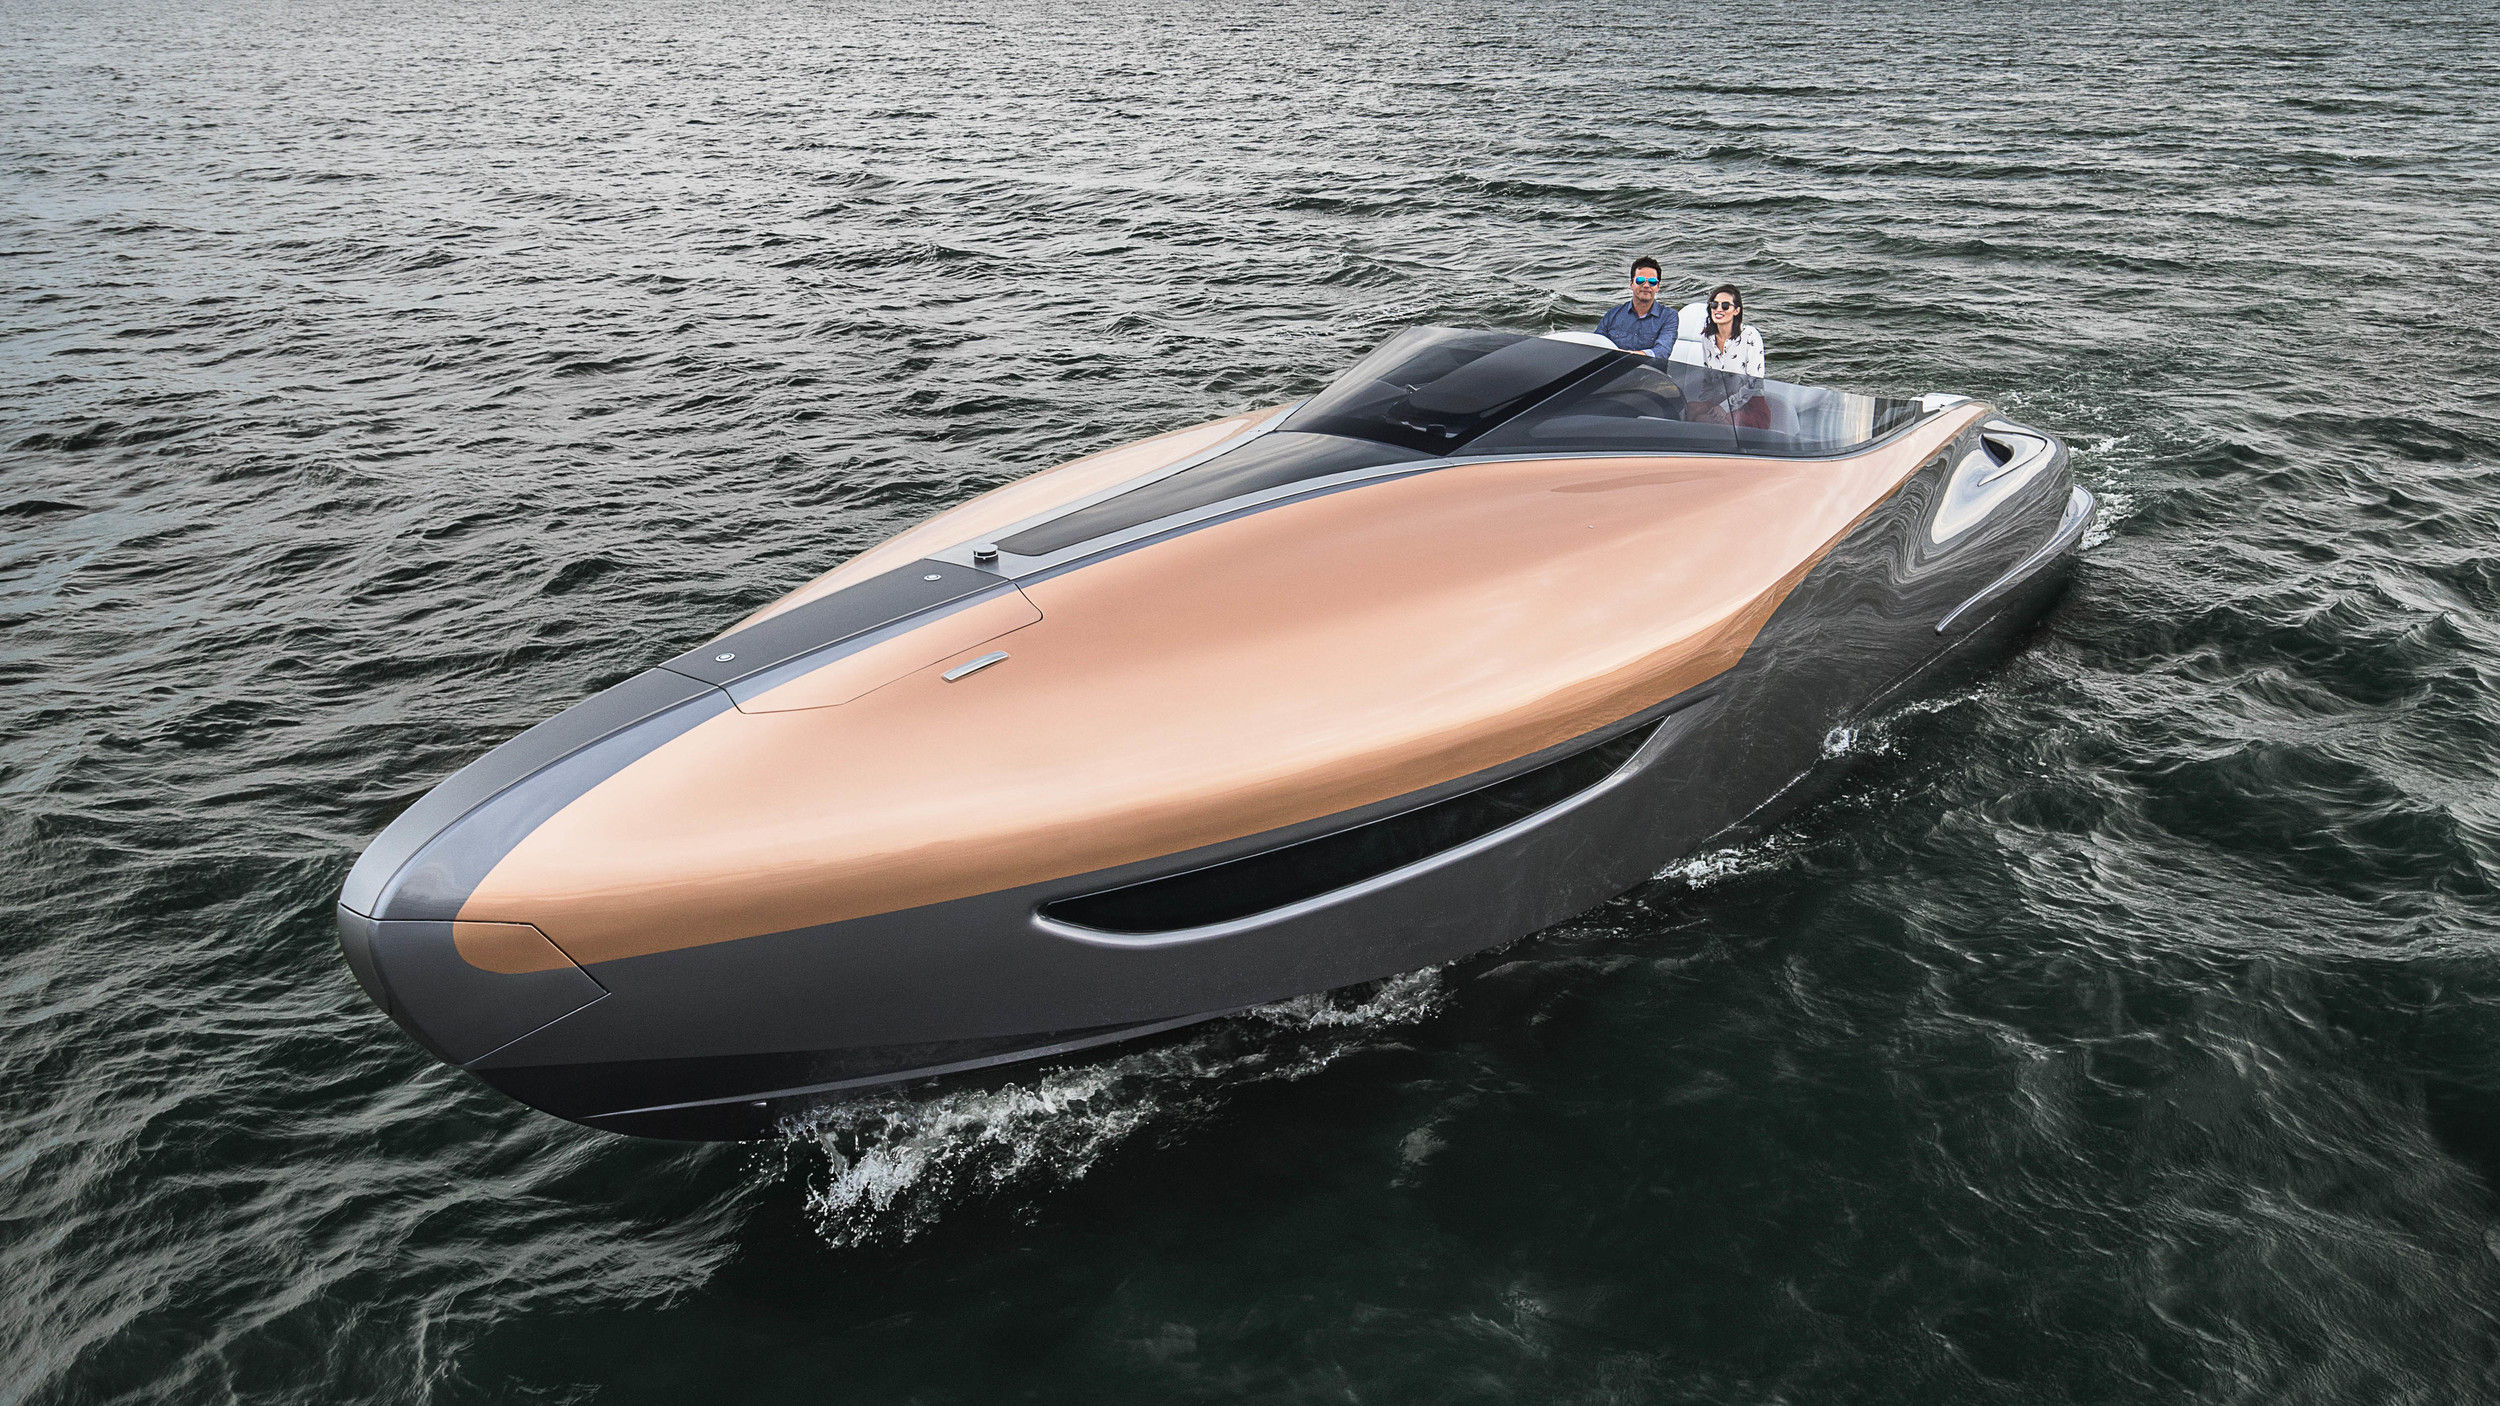 Lexus takes on the high seas with Sport Yacht concept